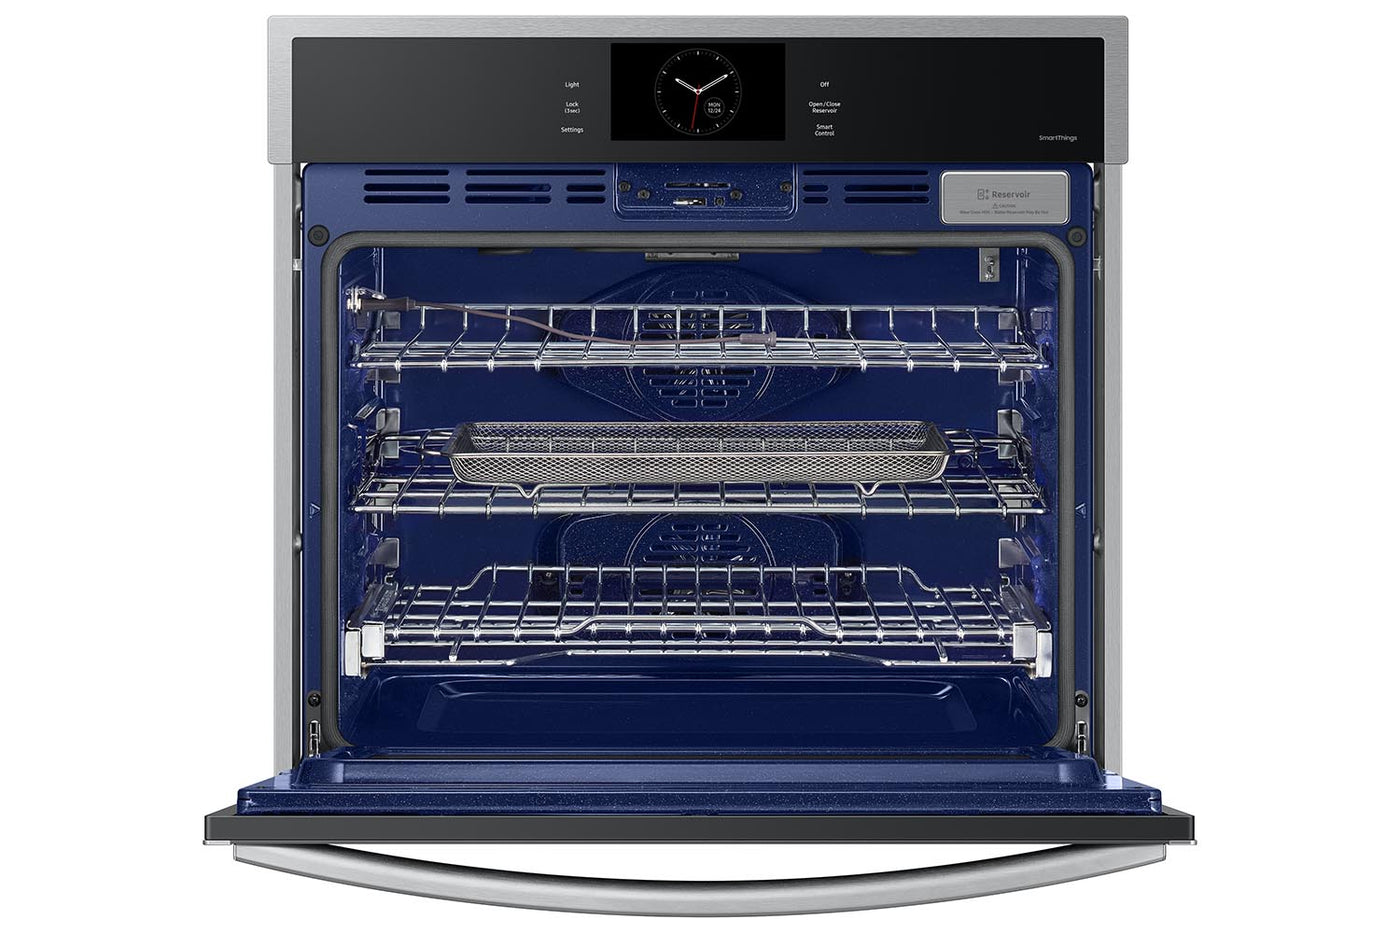 Samsung Stainless Steel Wall Oven (5.1 cu. ft) - NV51CG600SSRAA